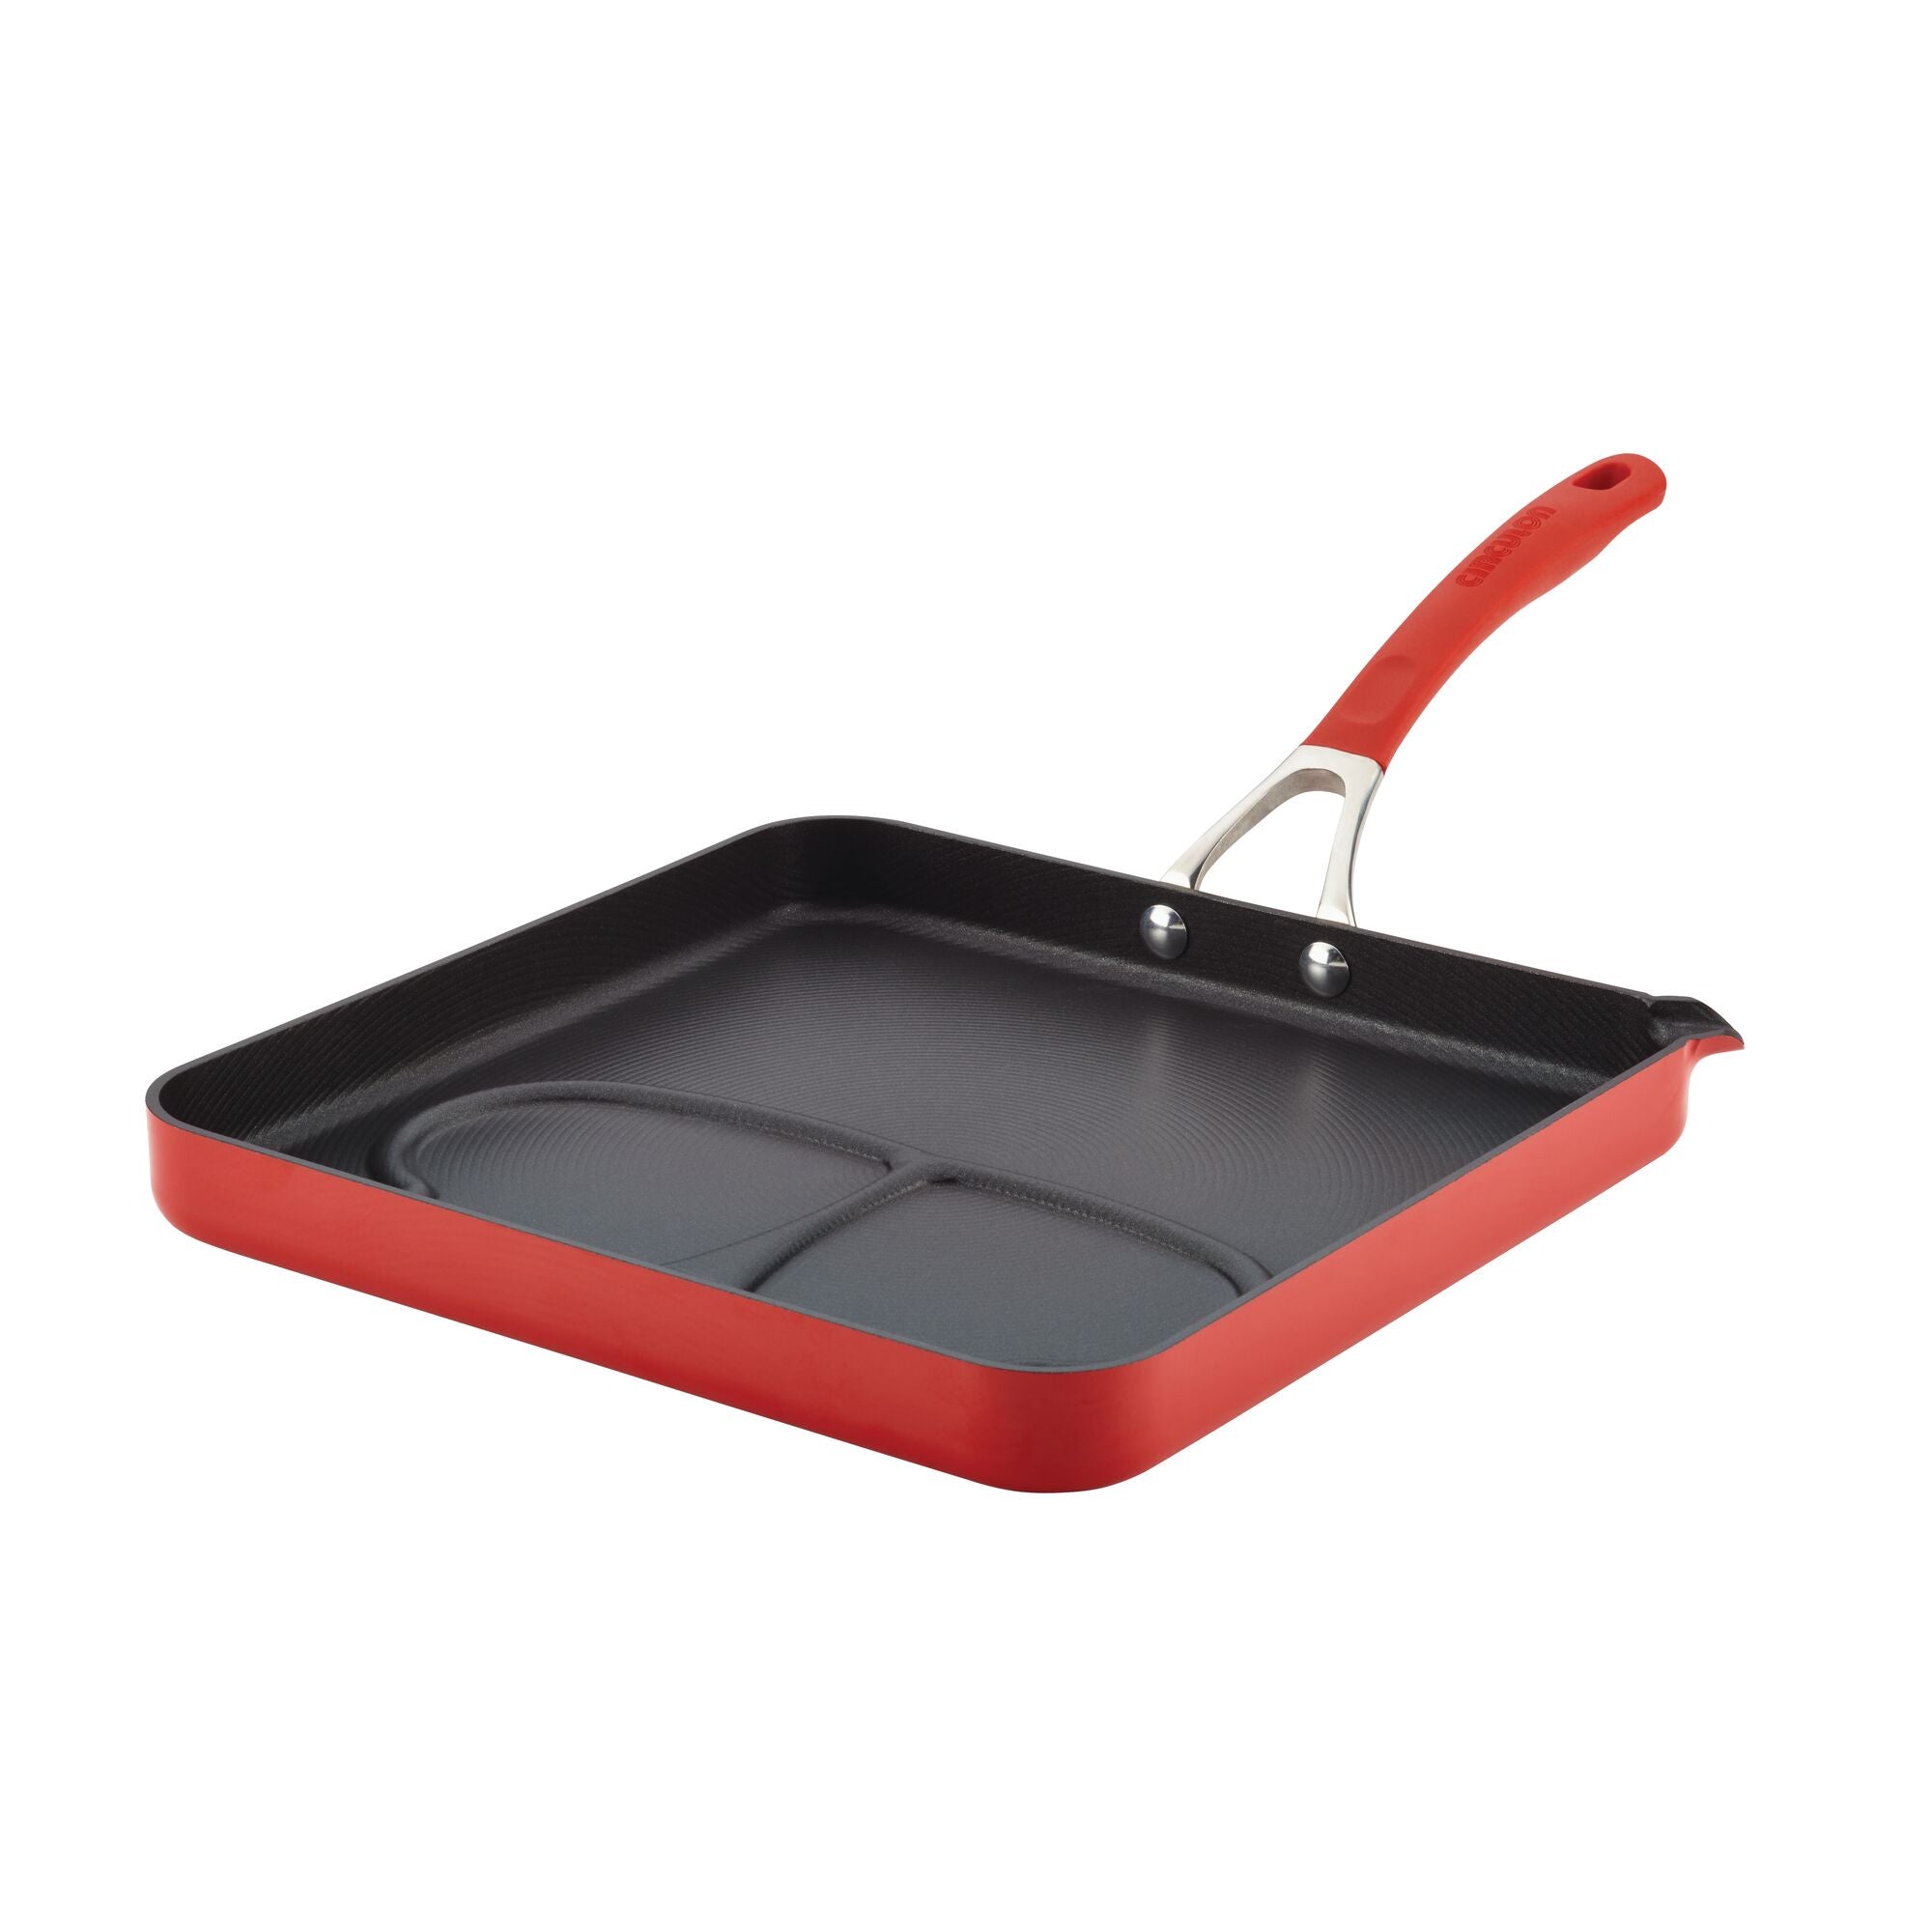 11-Inch Square Sweetheart Griddle